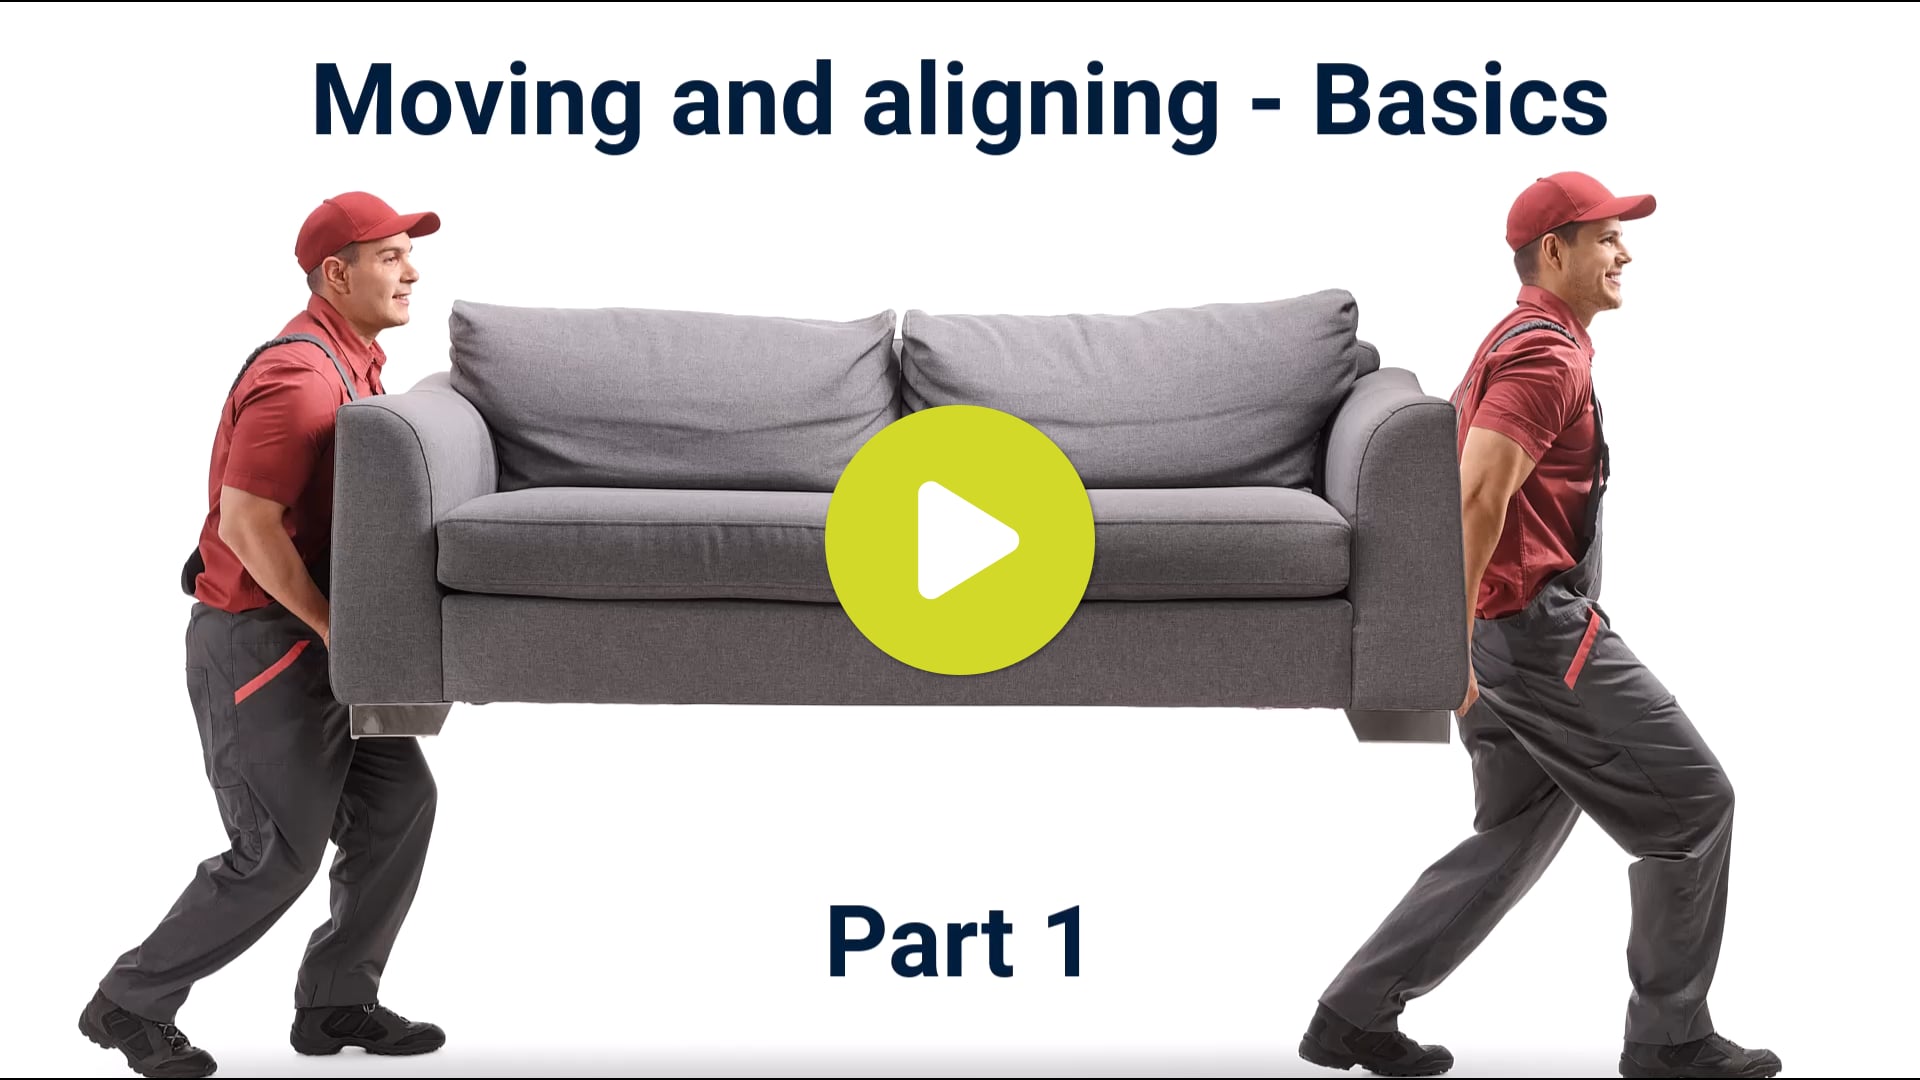 Moving and aligning - Part 1 - The Basics